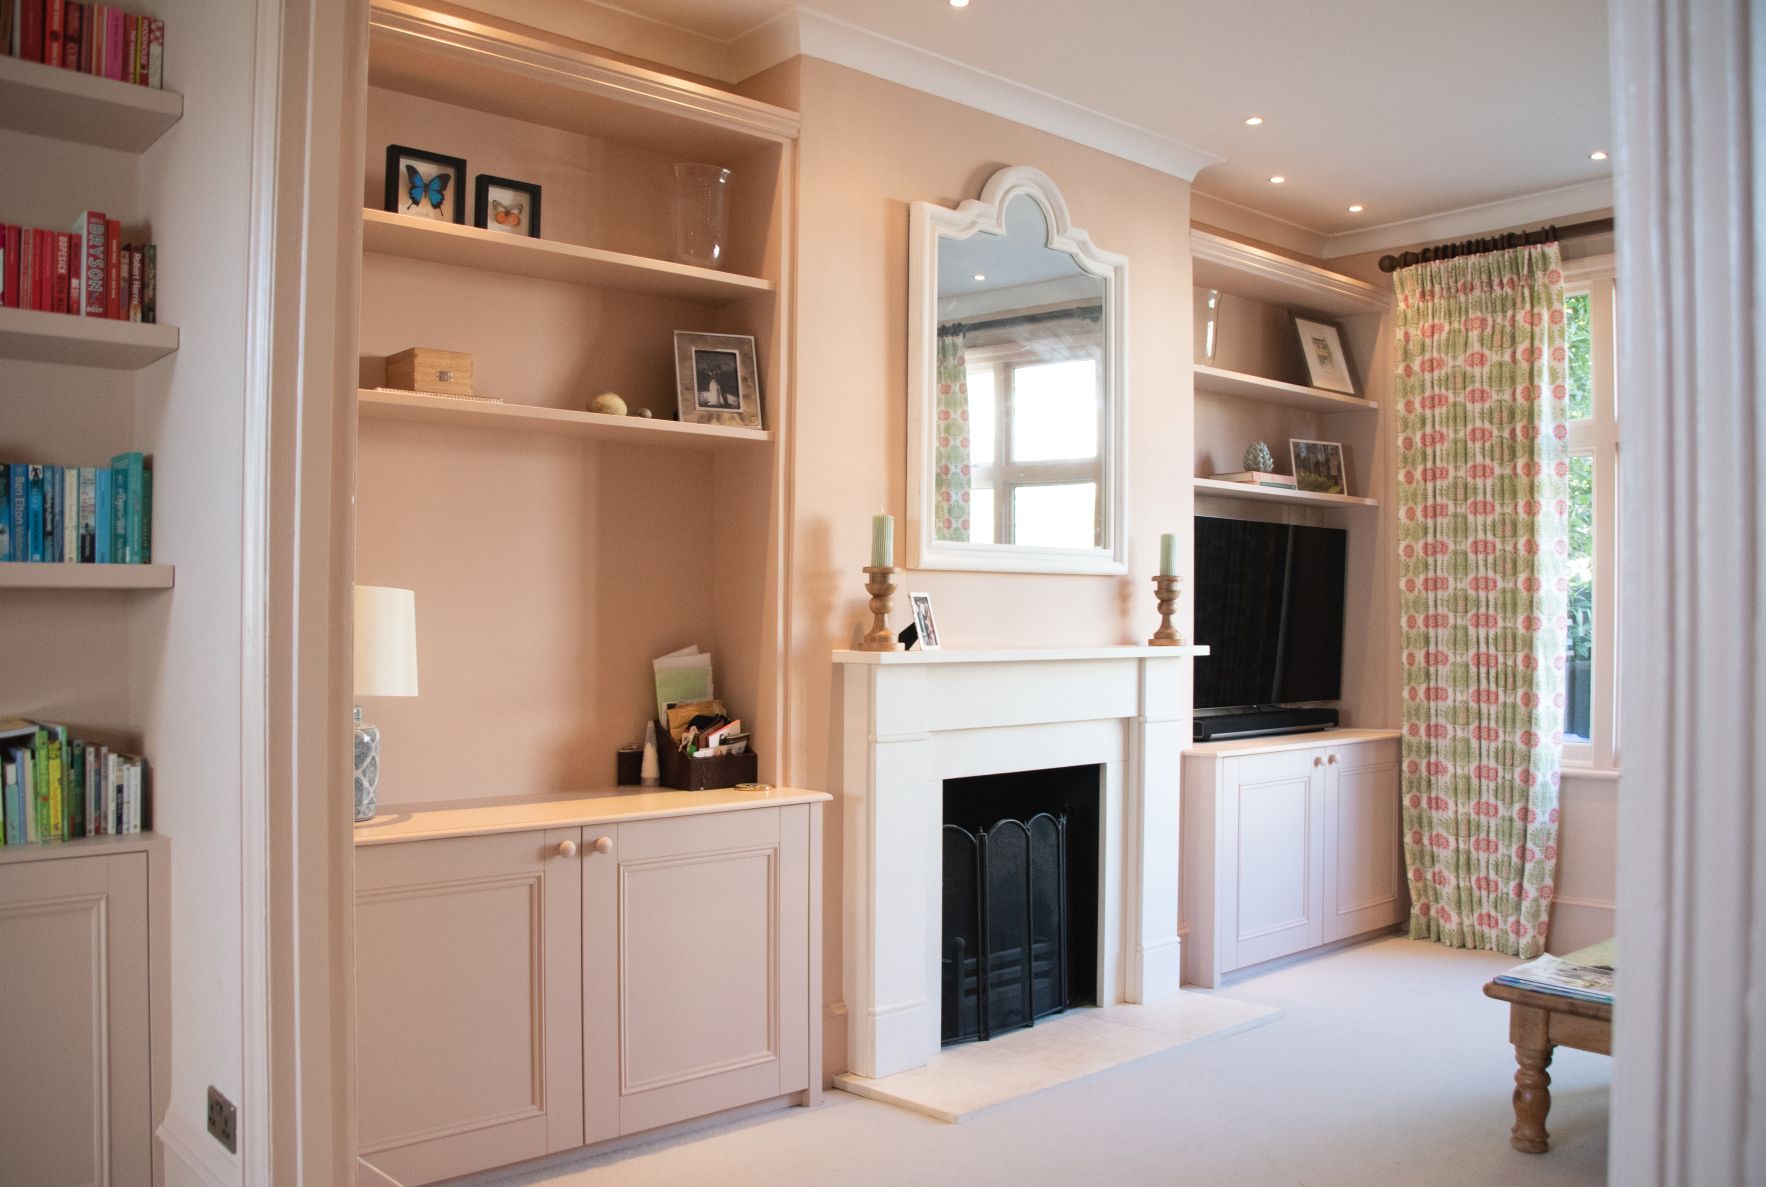 Fitted living room pink cabinets and shelving in alcoves